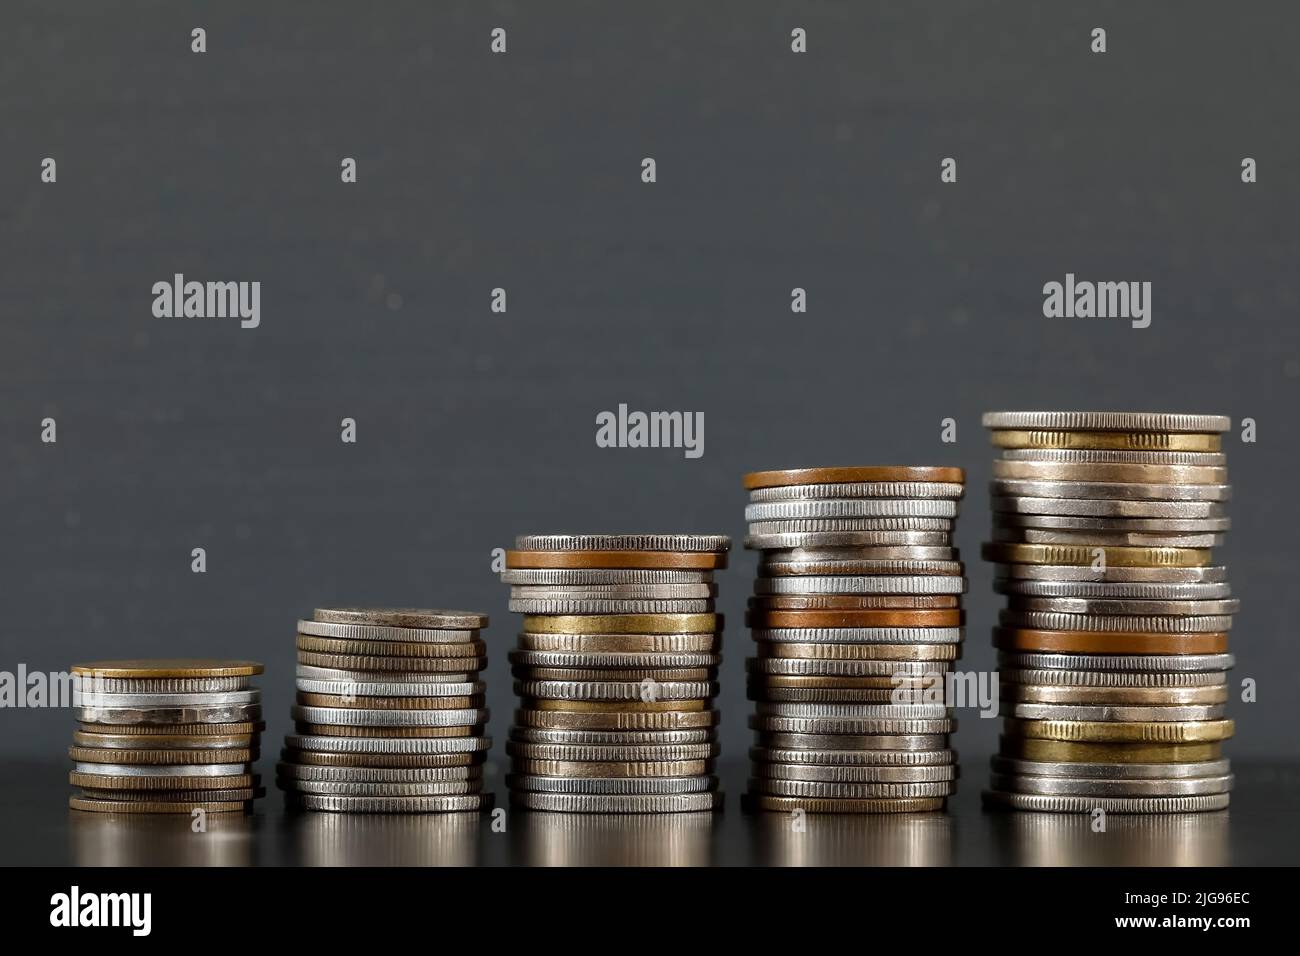 The image of money, in this case coins, express economic growth. Stock Photo